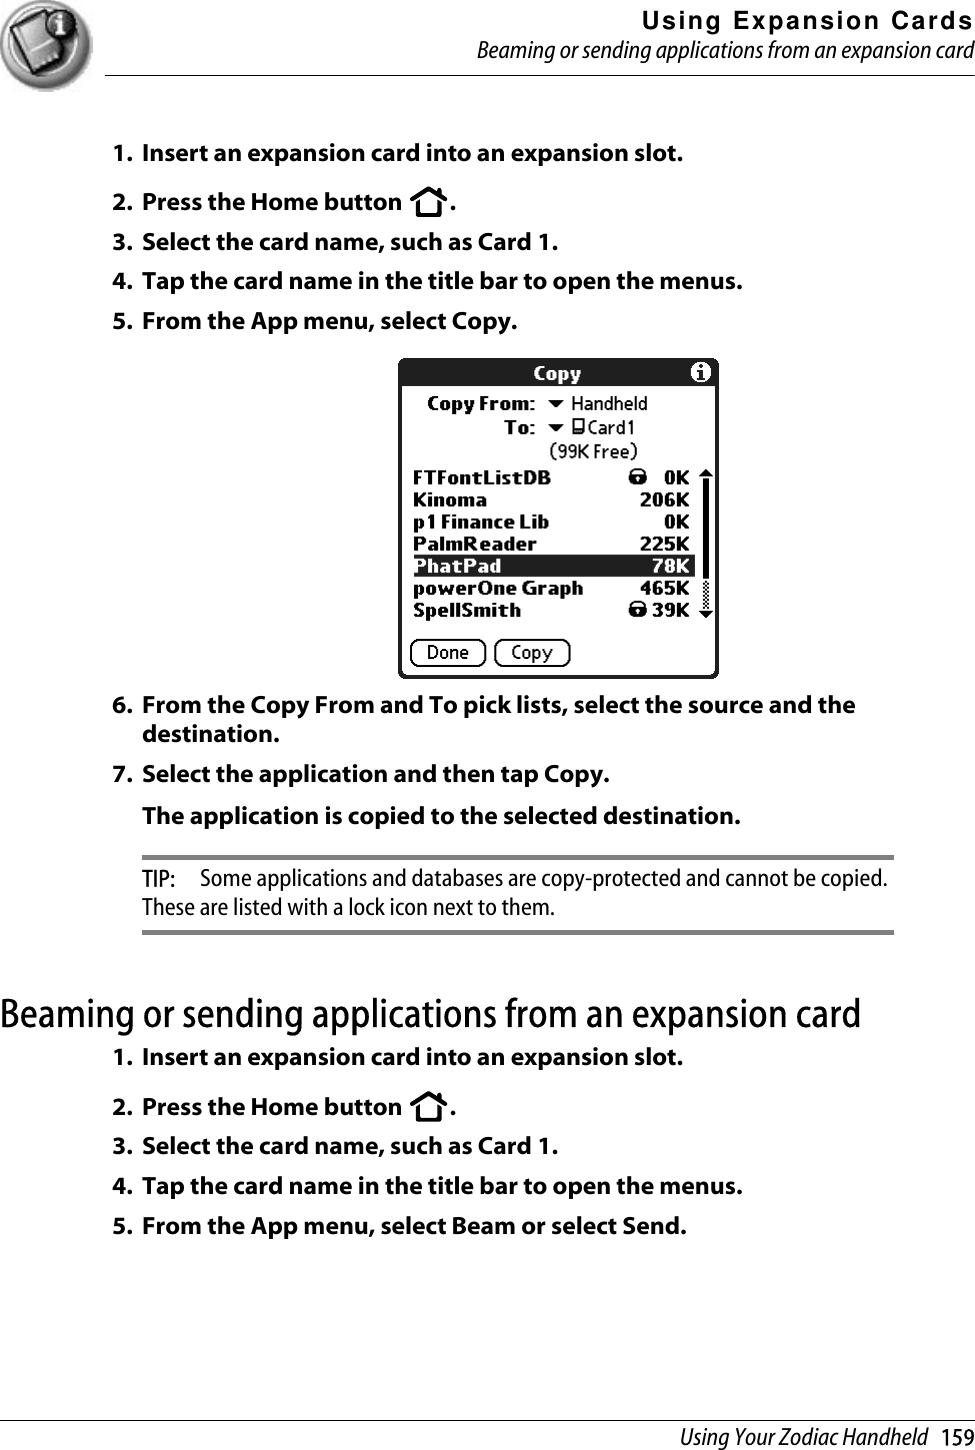 Using Expansion CardsBeaming or sending applications from an expansion cardUsing Your Zodiac Handheld   1591. Insert an expansion card into an expansion slot.2. Press the Home button  .3. Select the card name, such as Card 1.4. Tap the card name in the title bar to open the menus. 5. From the App menu, select Copy.6. From the Copy From and To pick lists, select the source and the destination.7. Select the application and then tap Copy.The application is copied to the selected destination.TIP:  Some applications and databases are copy-protected and cannot be copied. These are listed with a lock icon next to them.Beaming or sending applications from an expansion card1. Insert an expansion card into an expansion slot.2. Press the Home button  .3. Select the card name, such as Card 1.4. Tap the card name in the title bar to open the menus. 5. From the App menu, select Beam or select Send.